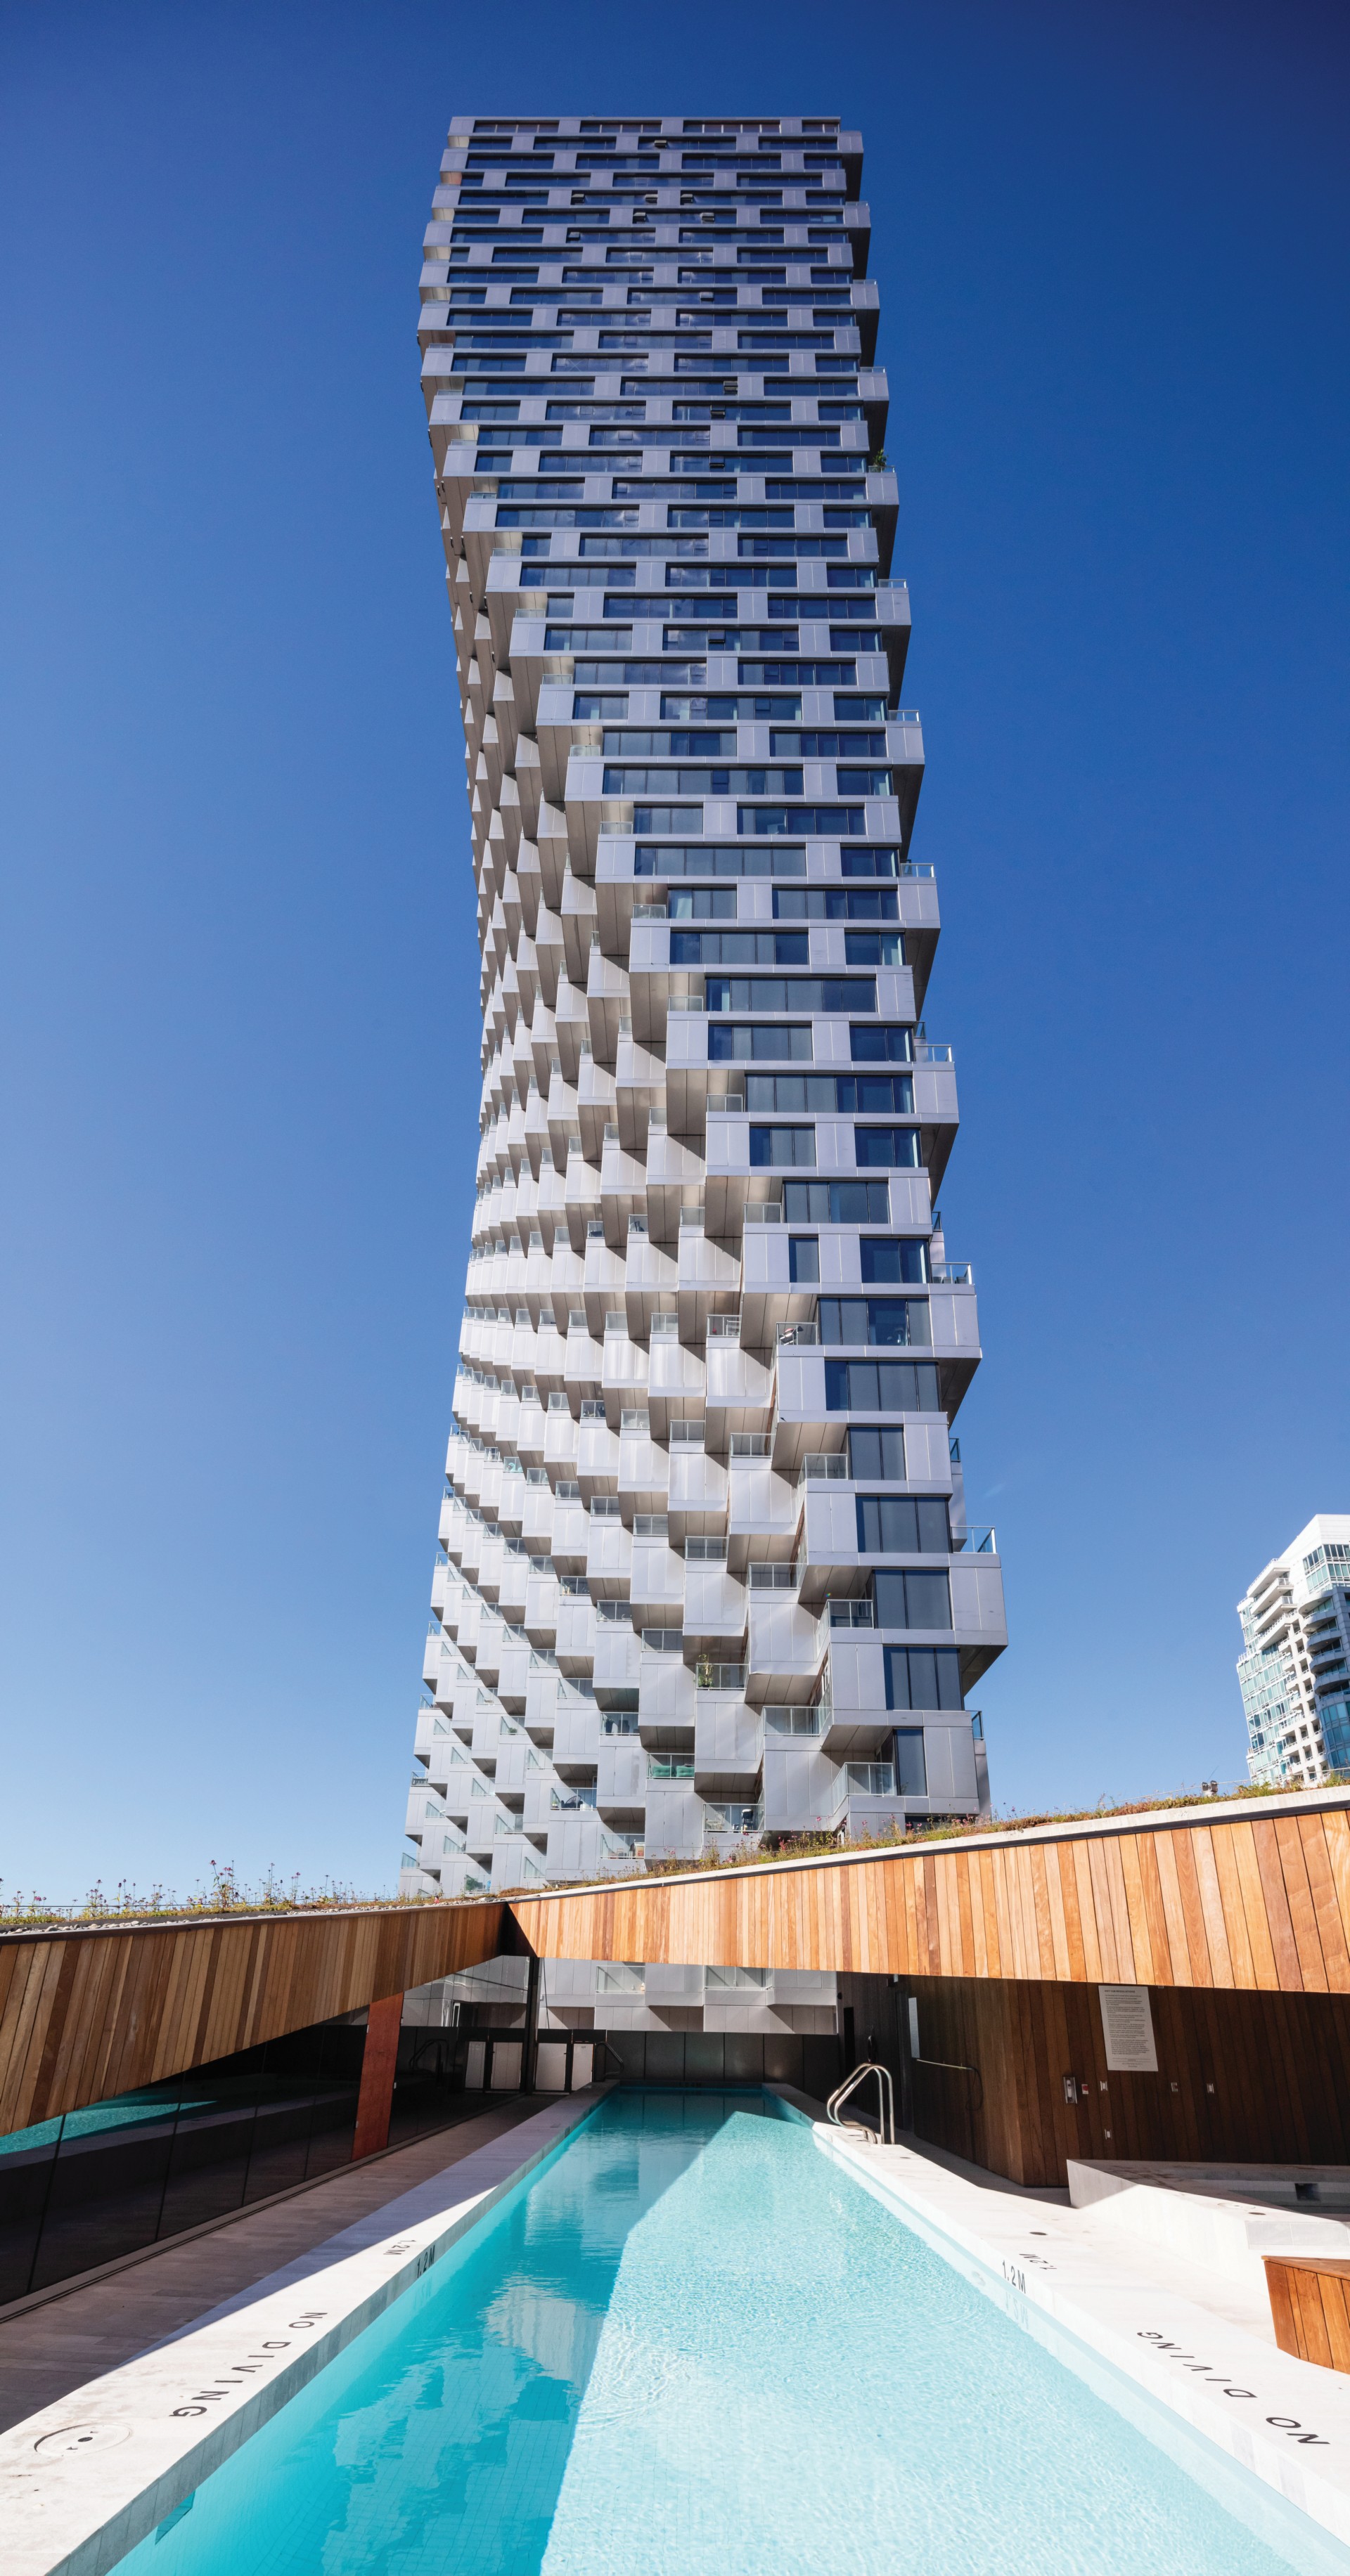 Vancouver House designed by BIG studio named Best Tall Building Worldwide 2021 
 | Floornature